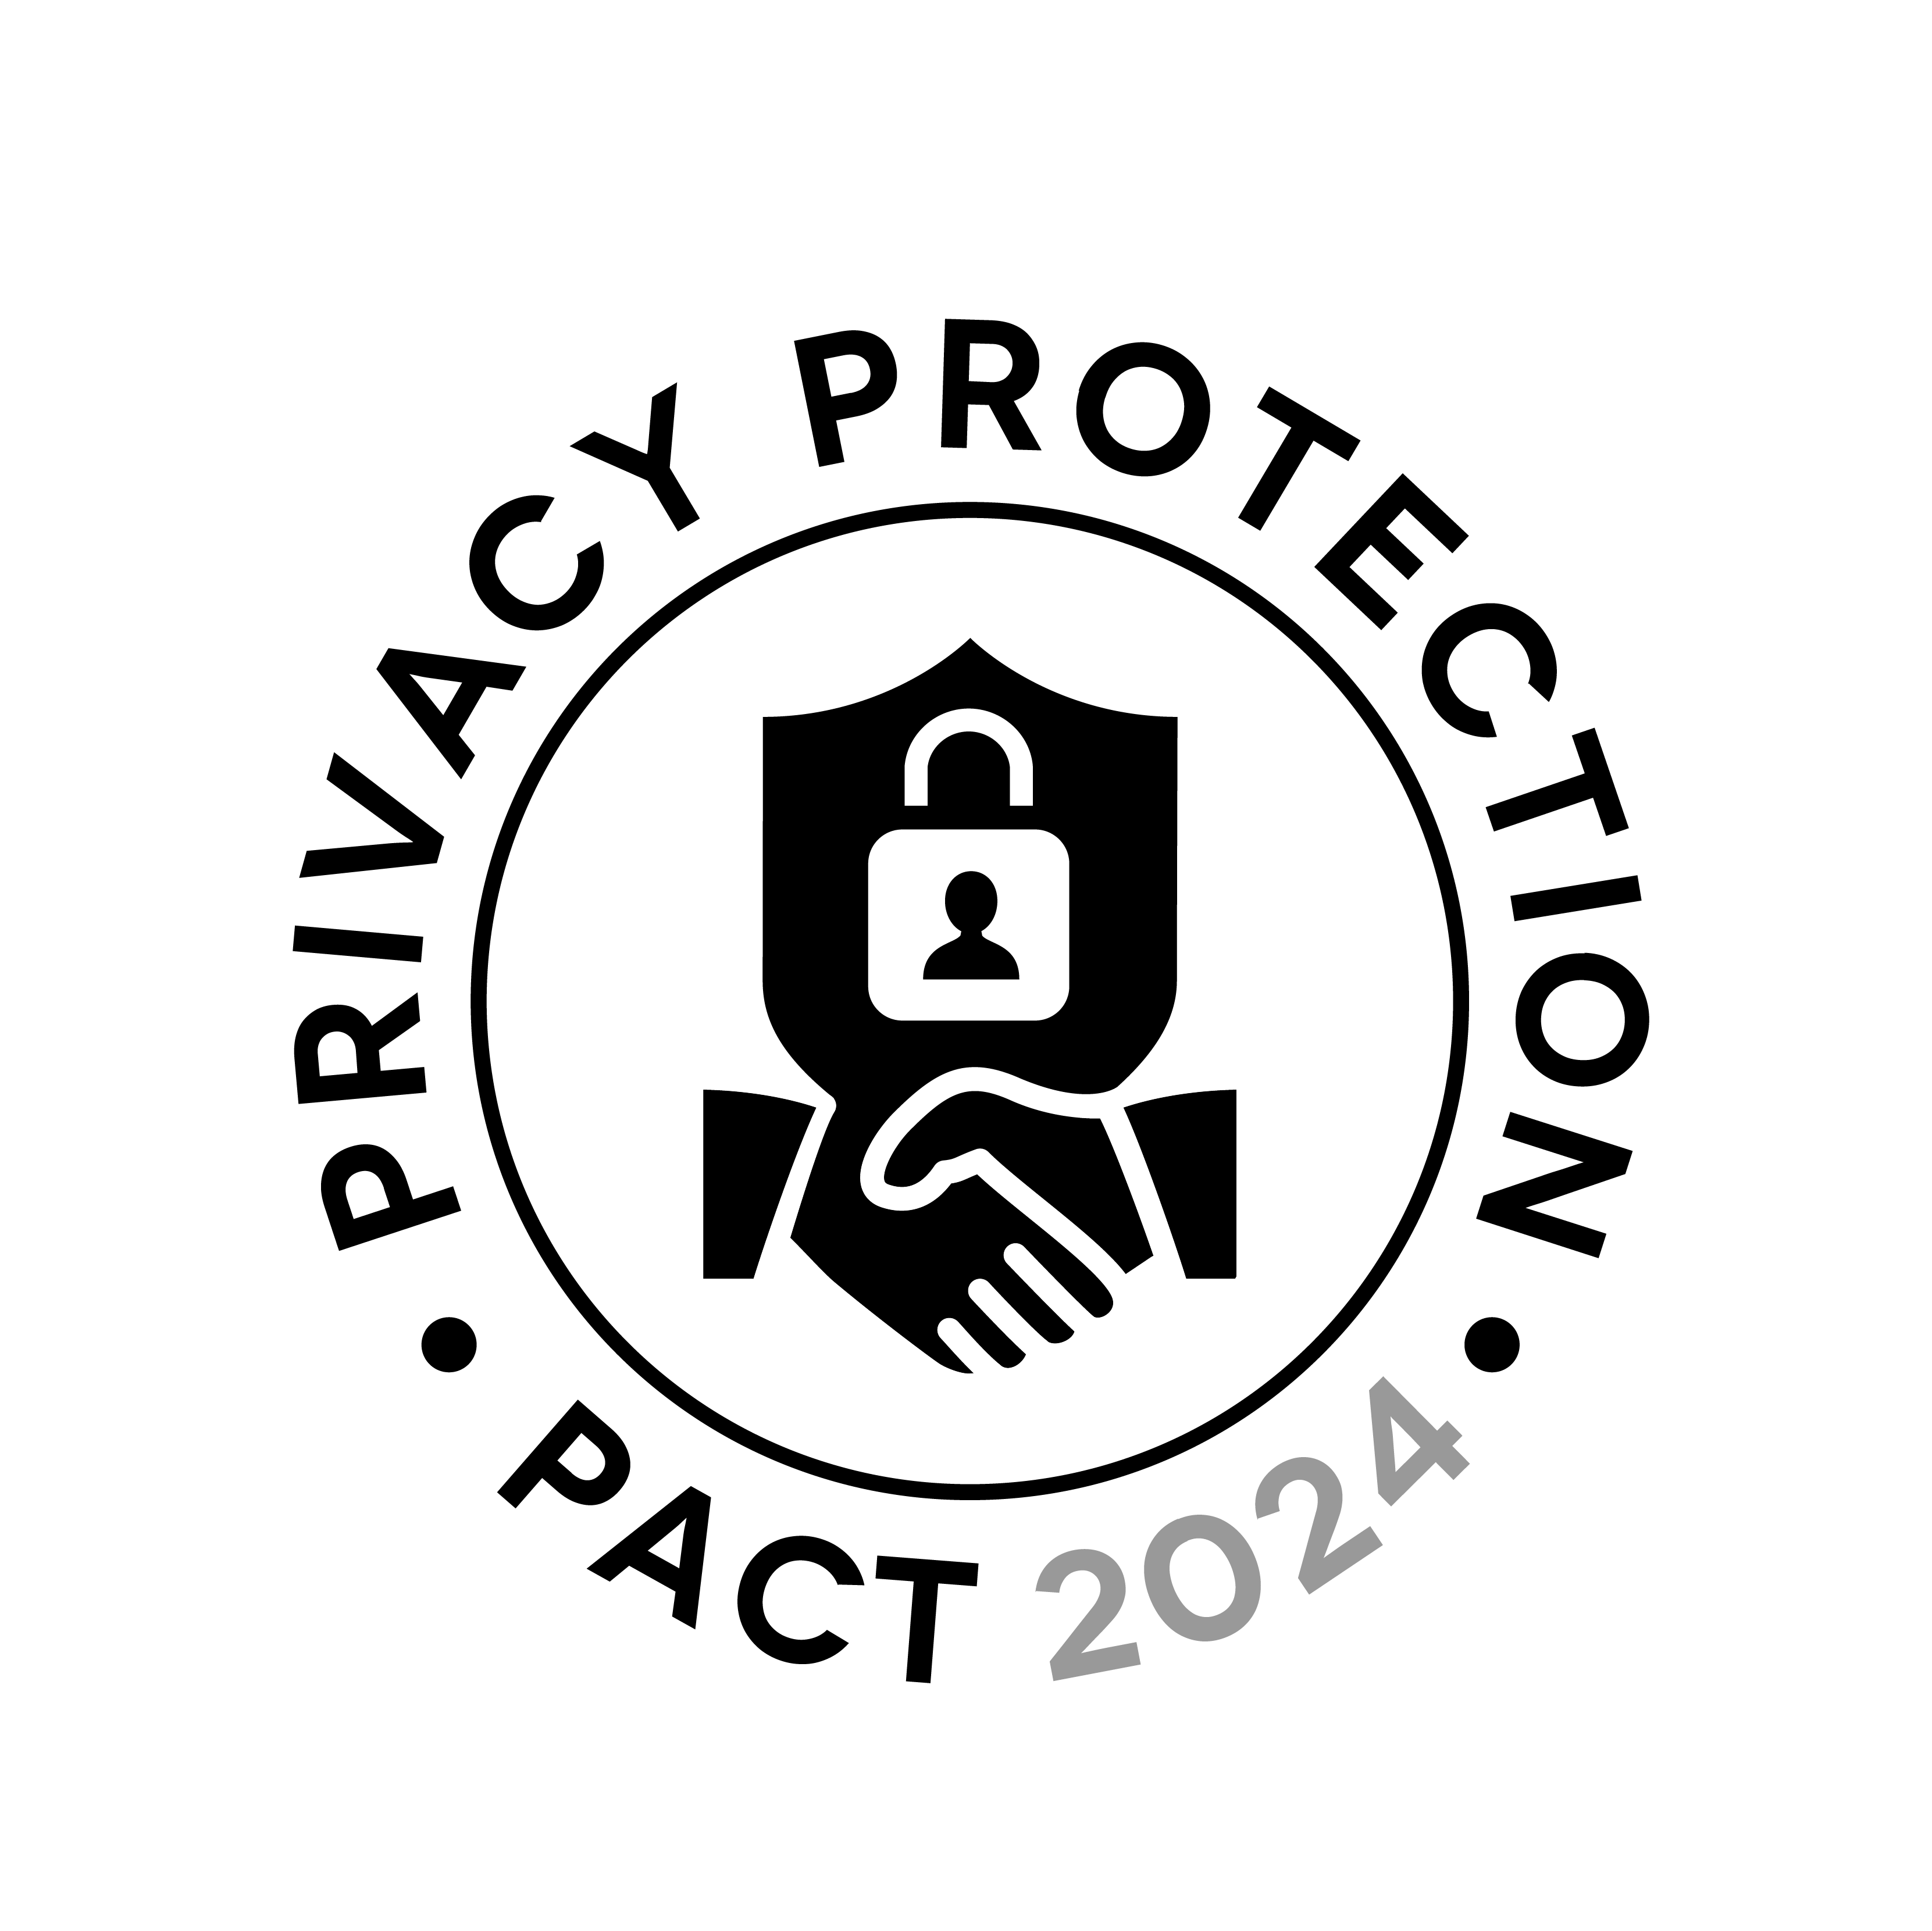 logo Privacy protection pact 2023